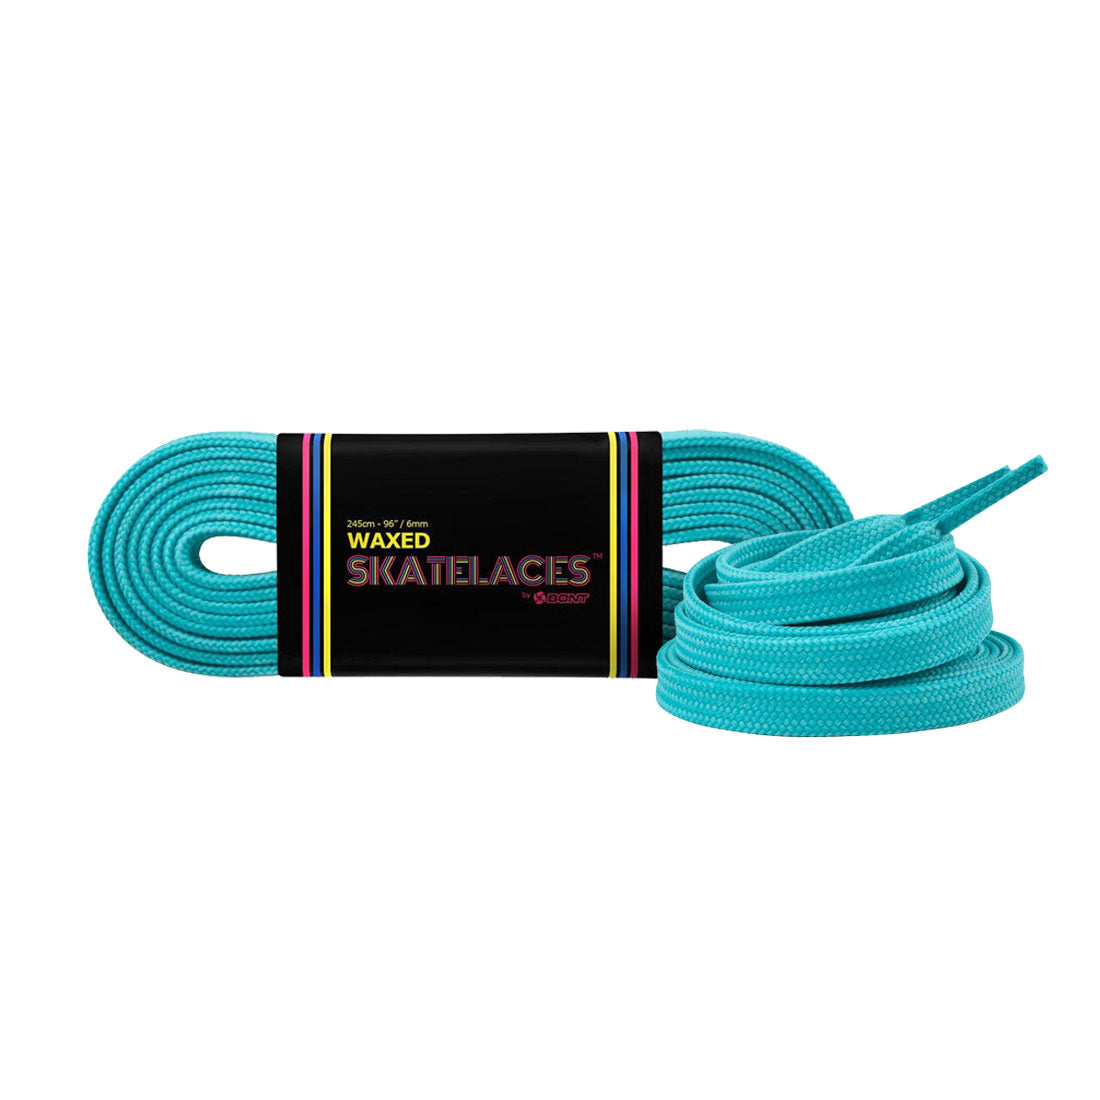 Bont Waxed 6mm Laces - 200cm/79in Pool Party Blue Laces